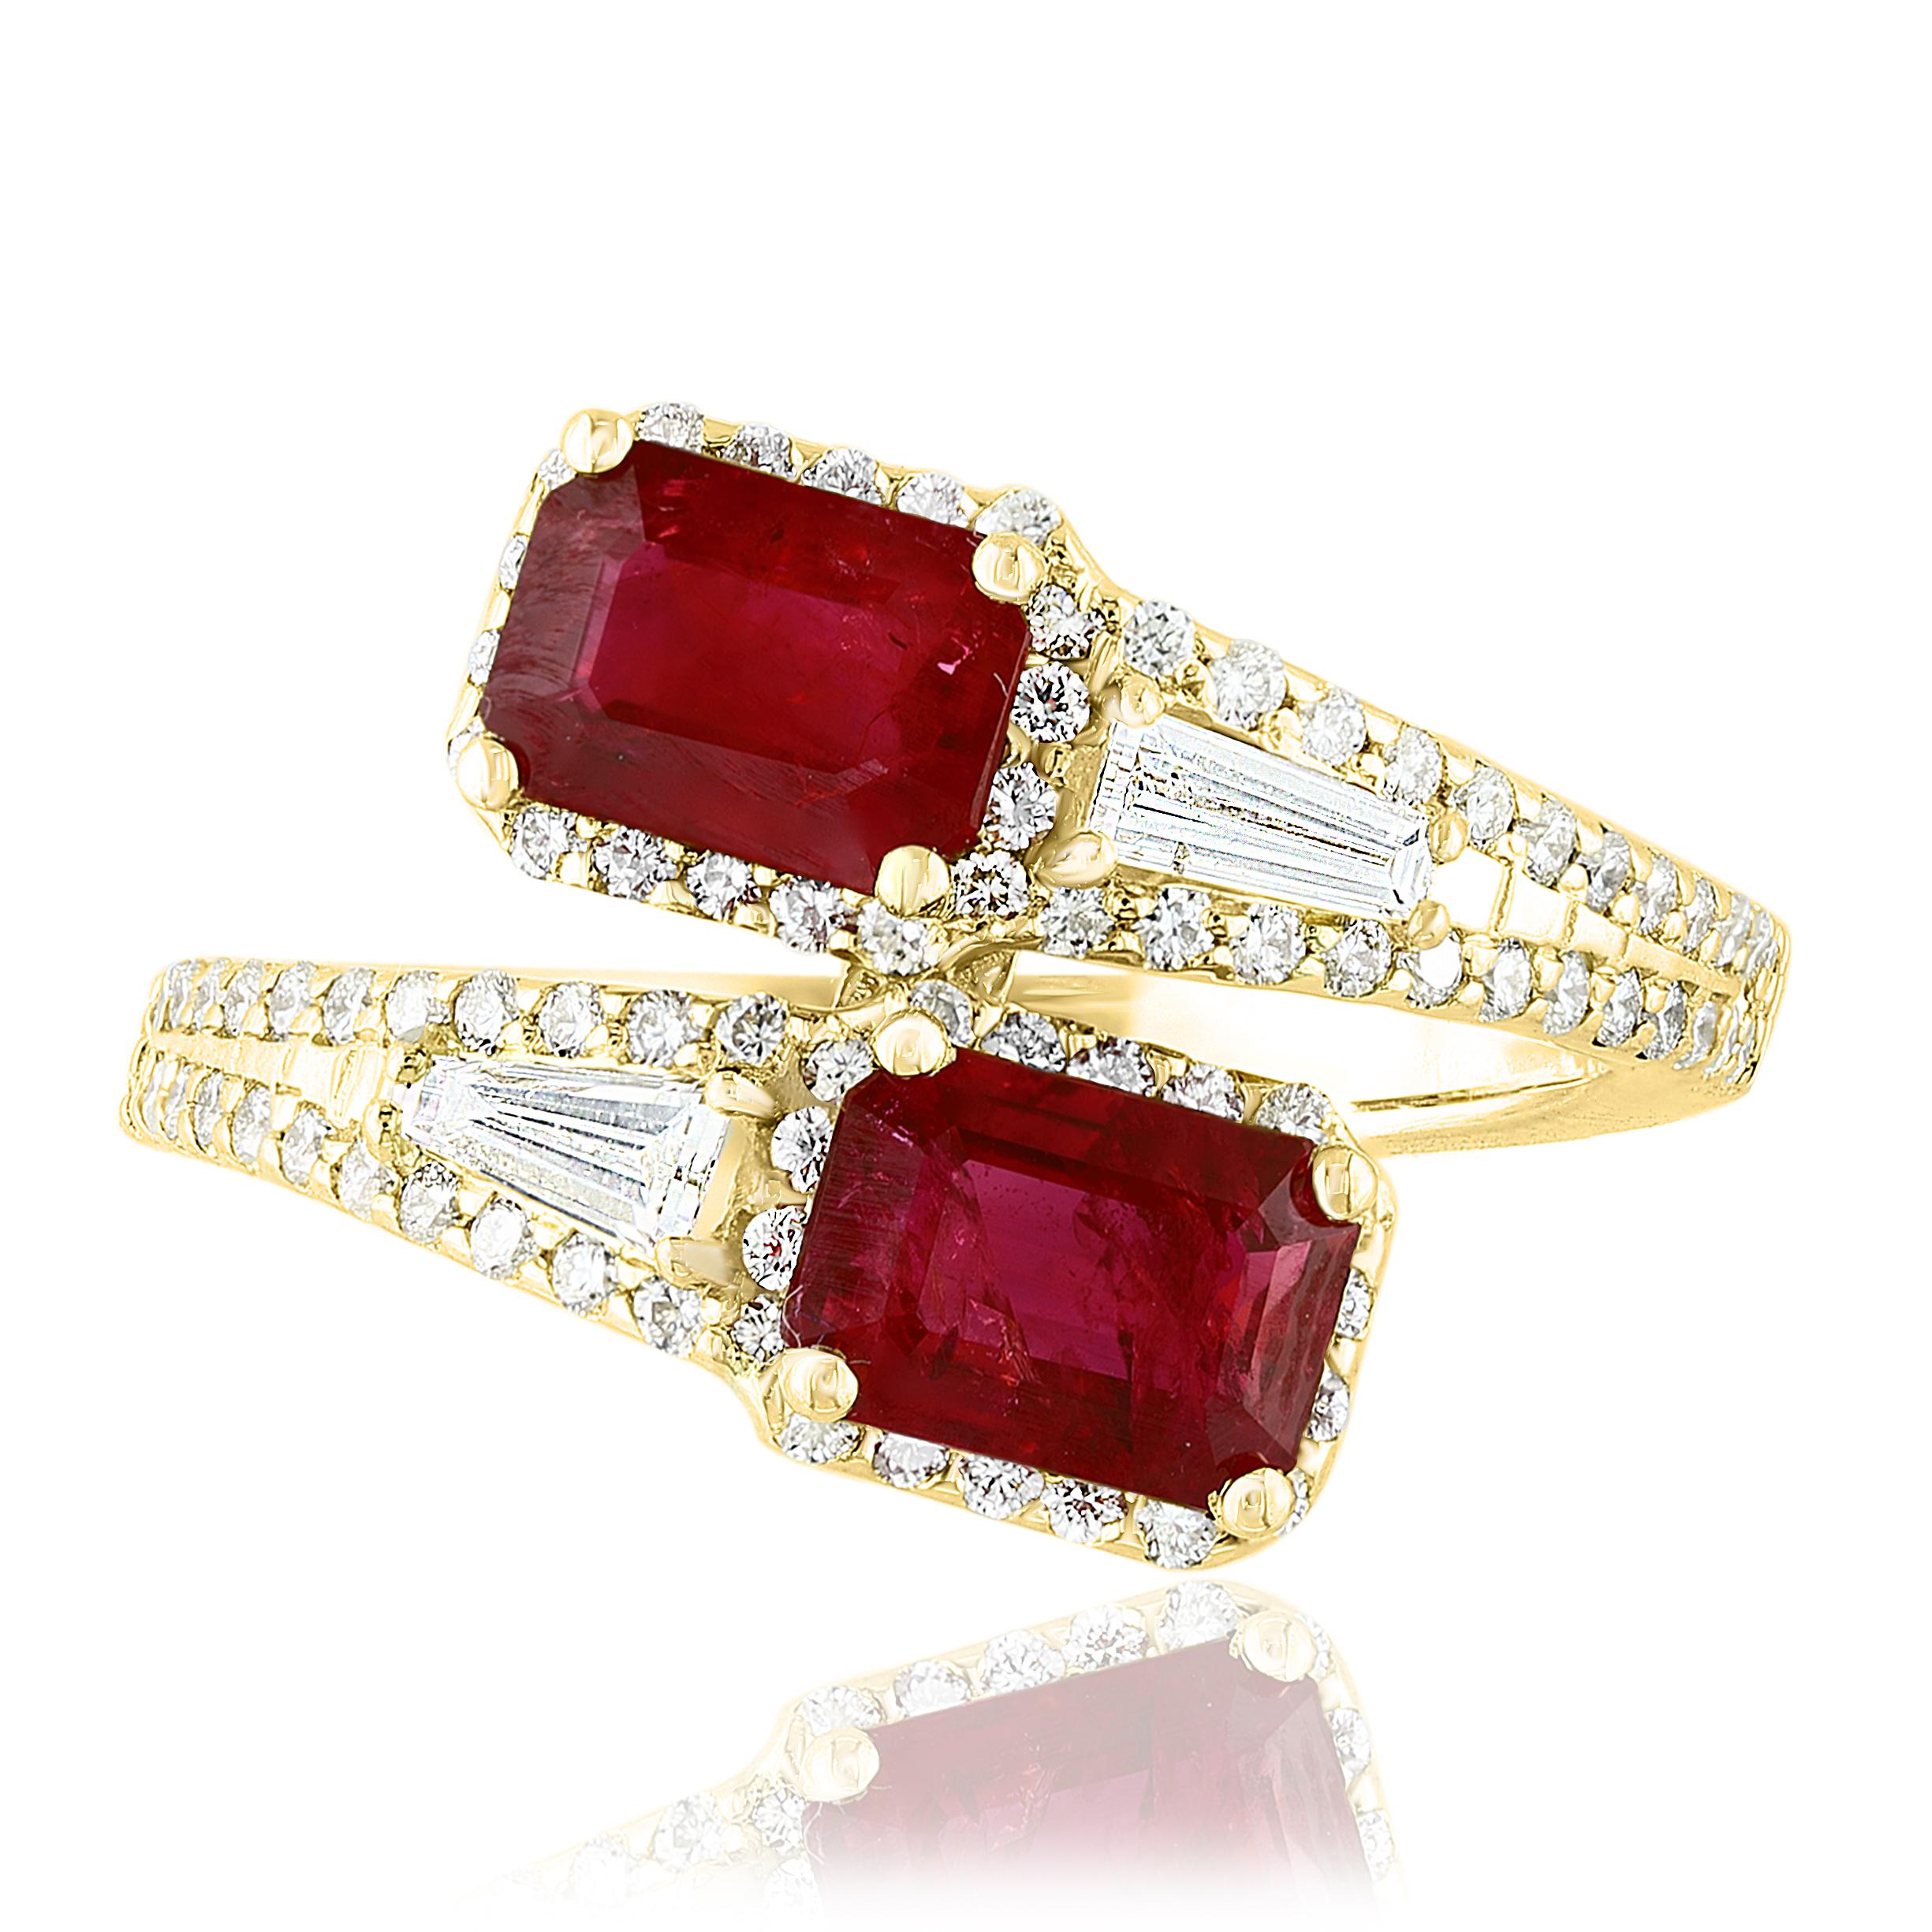 The stunning forever-together Toi et Moi ring features 2 Emerald cut Rubies embraced by east to west 2 baguette diamonds weigh and 84 round diamonds halfway to the shank. Handcrafted in 14k Yellow Gold.
2 emerald cut Rubies in the center weighs 2.18